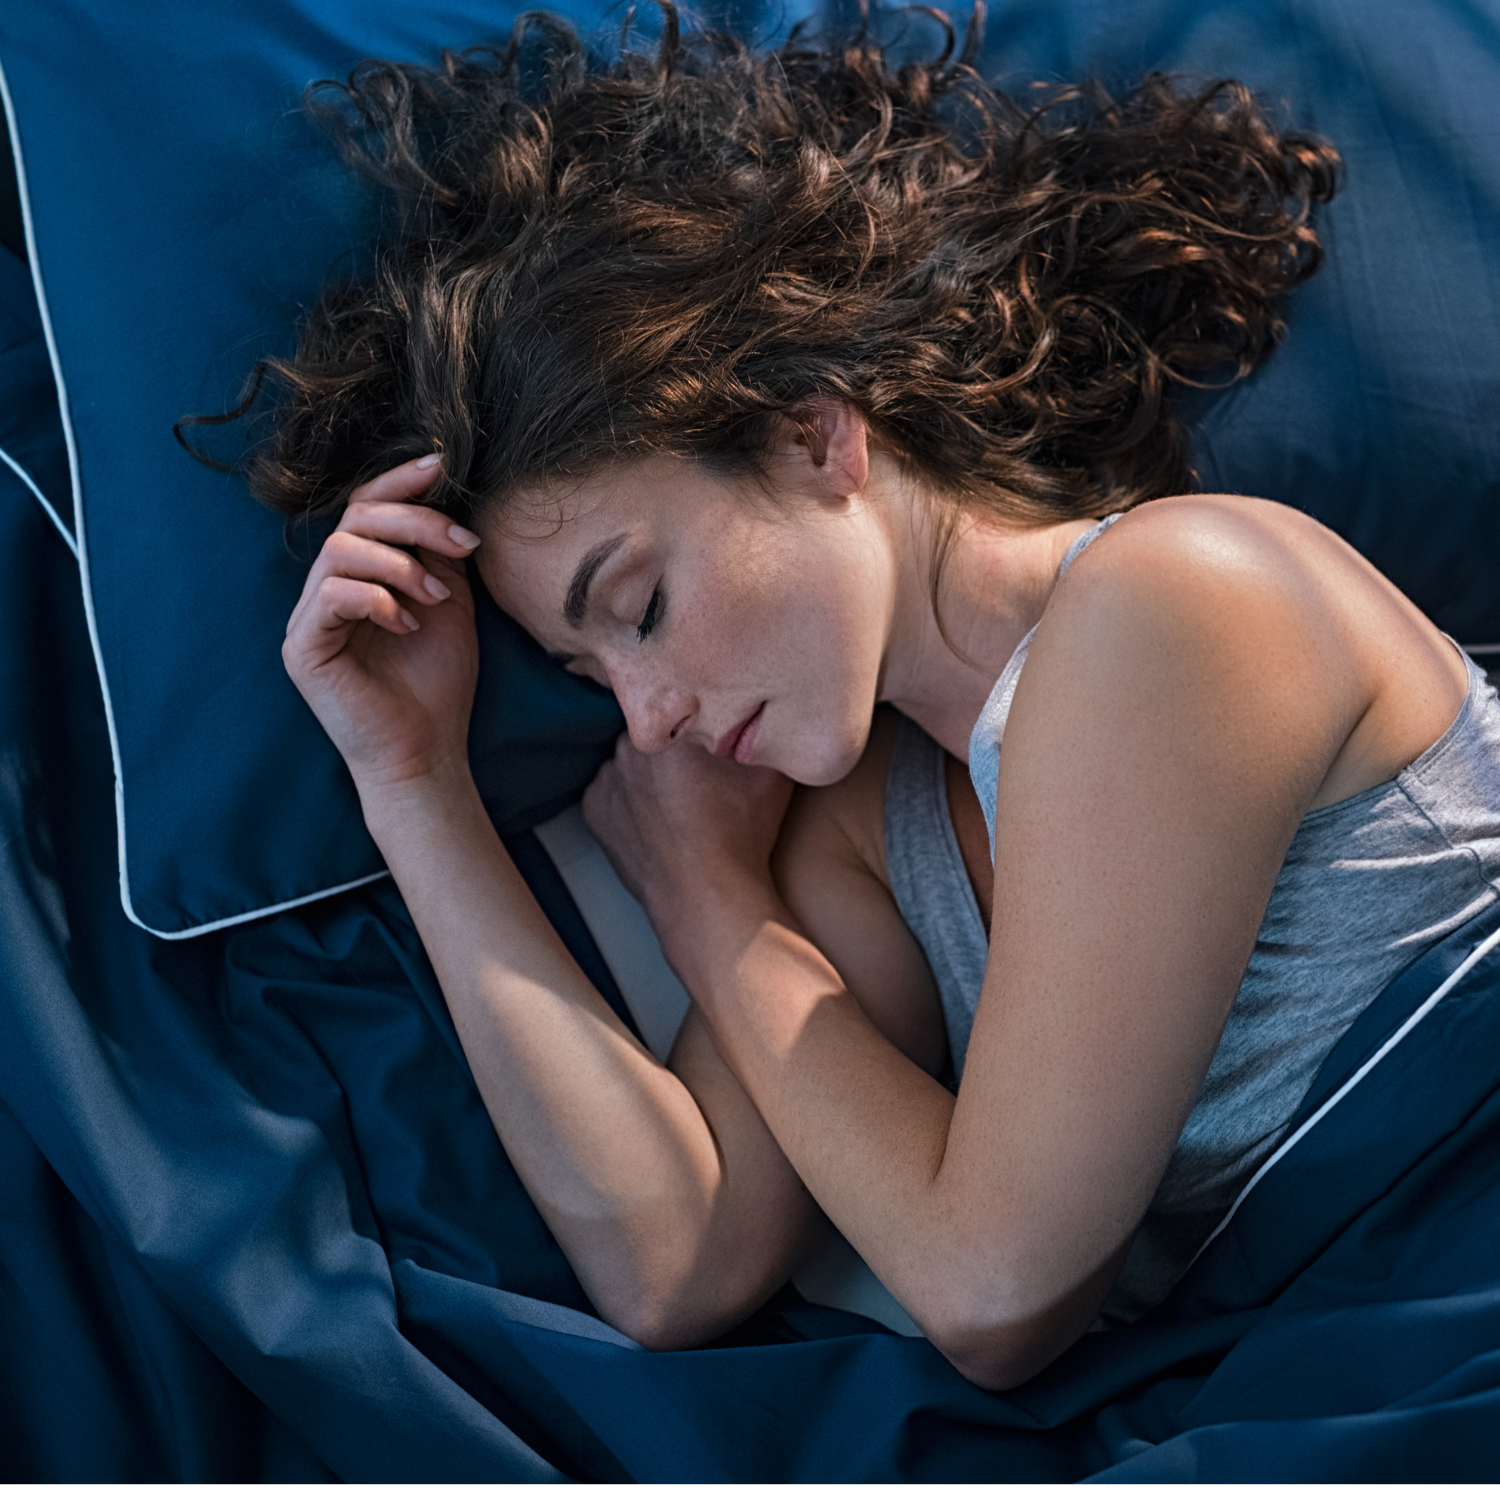 Illustration of a person with a medical condition sleeping comfortably on an air bed.